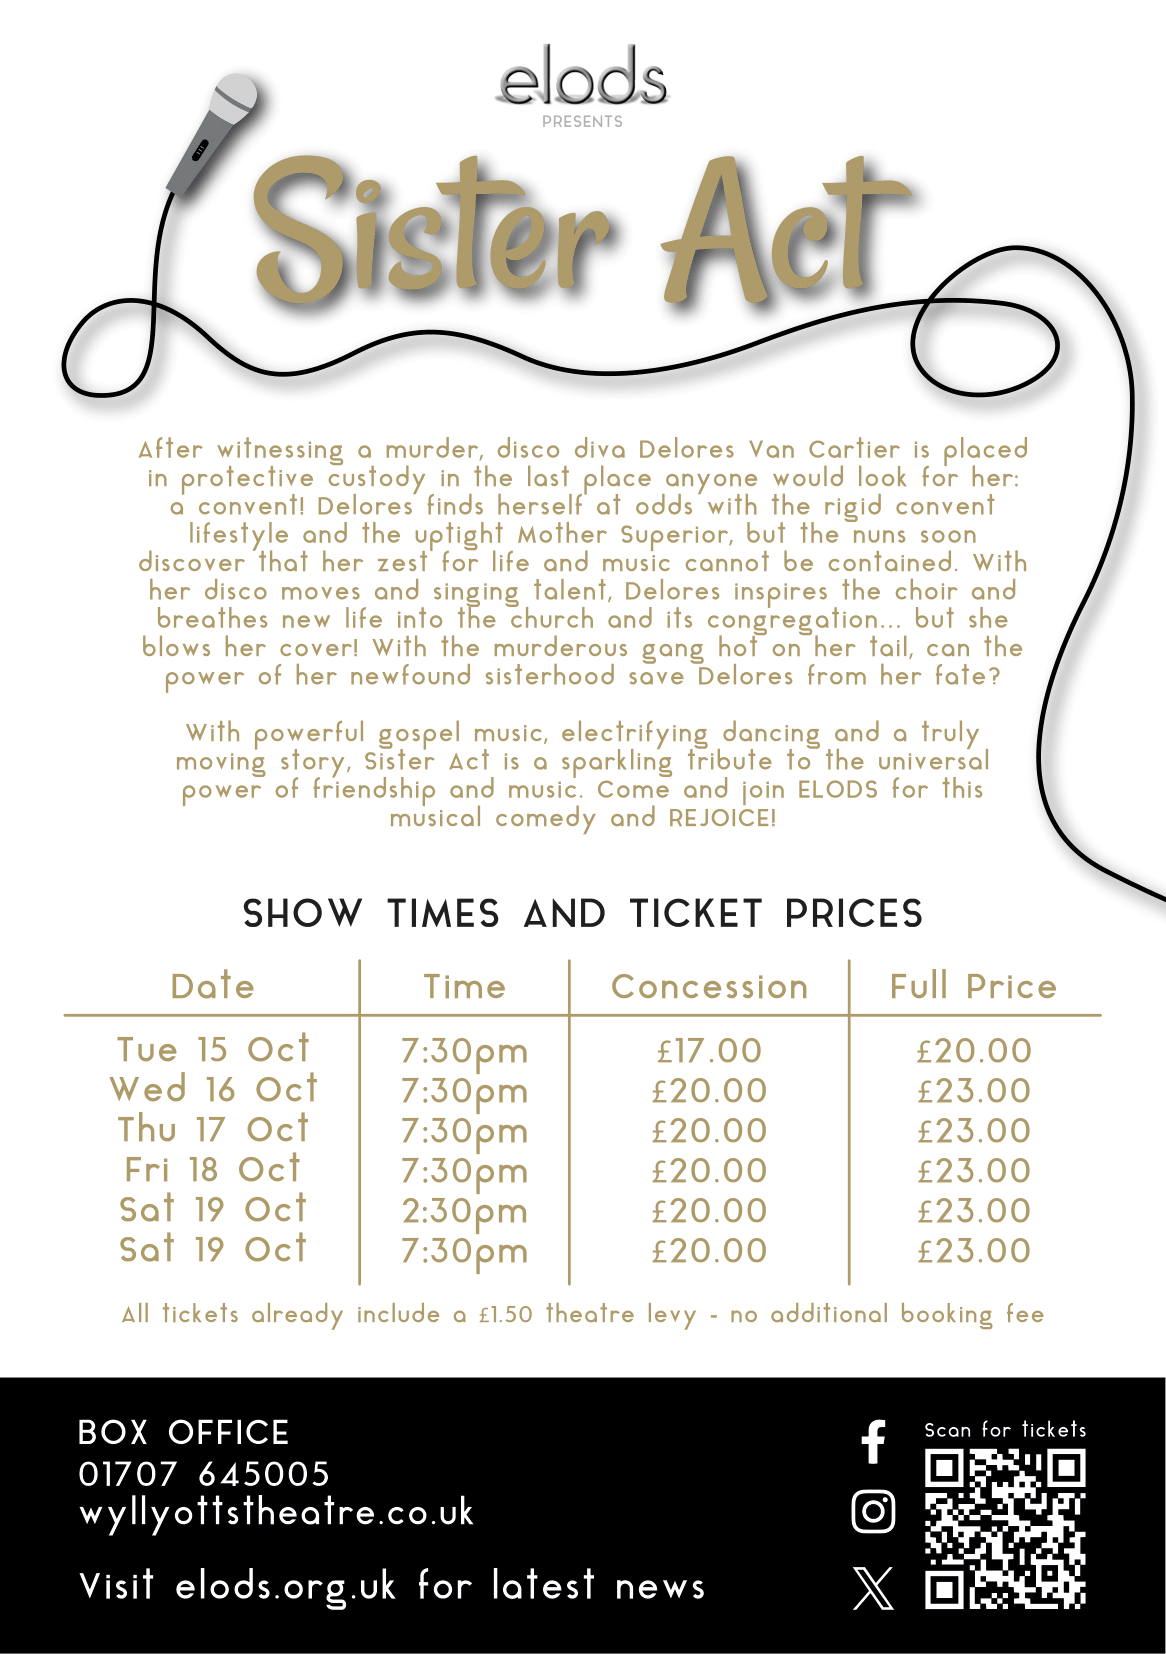 Sister Act - info and prices